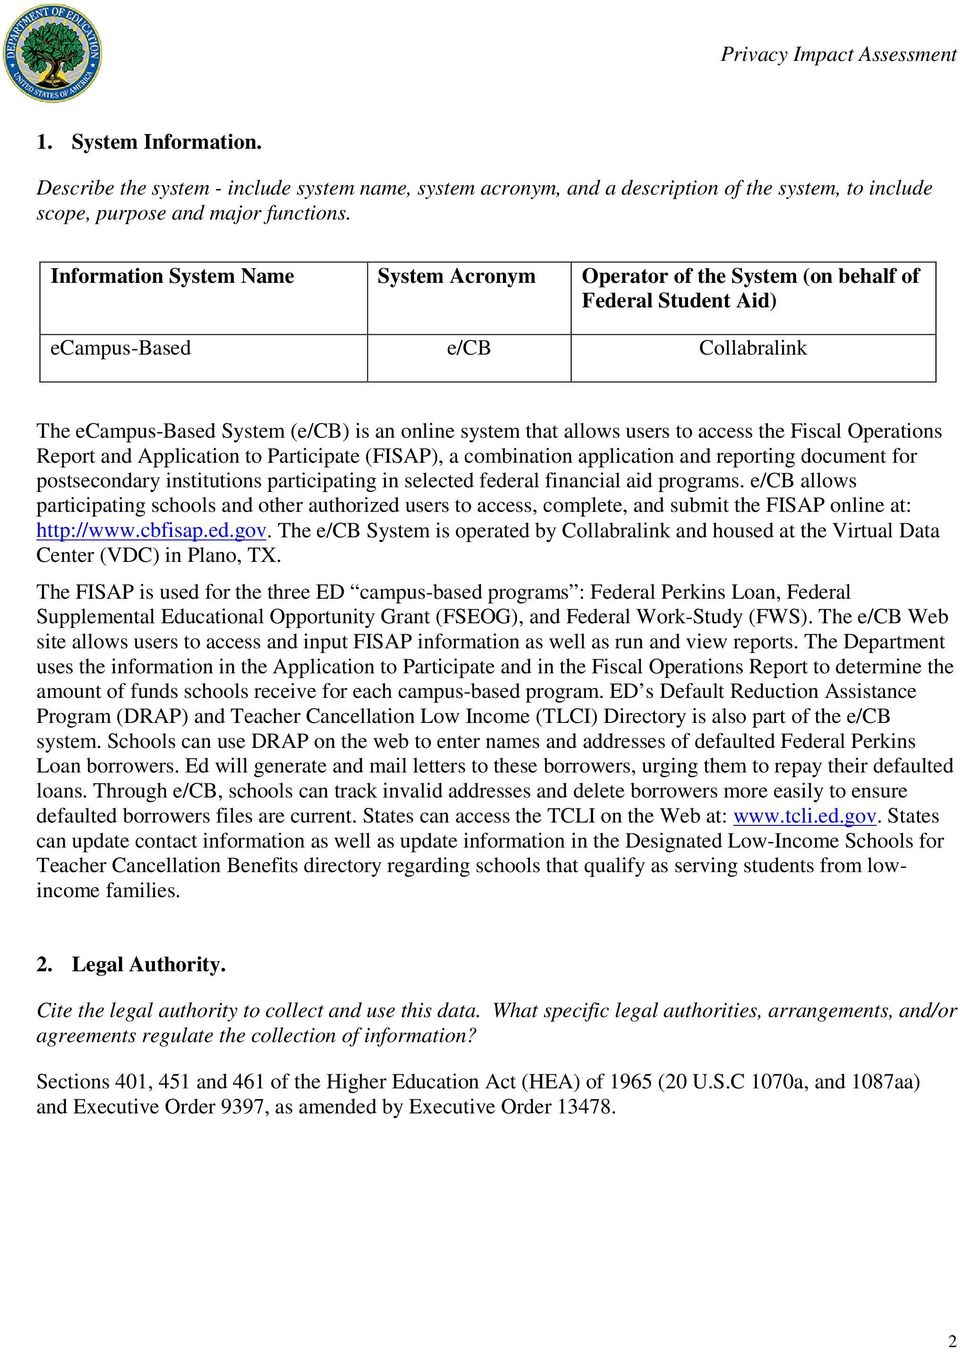 to access the Fiscal Operations Report and Application to Participate (FISAP), a combination application and reporting document for postsecondary institutions participating in selected federal